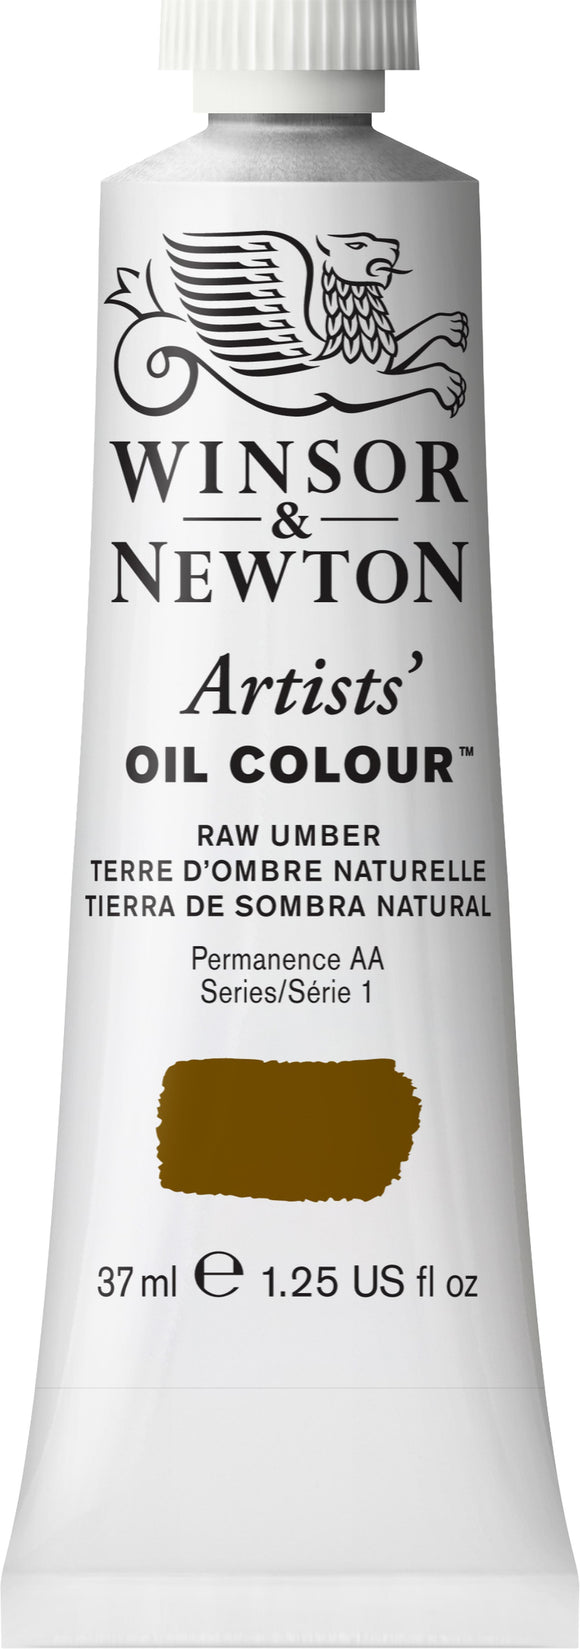 Winsor & Newton Artists Oil Color Raw Umber 37Ml